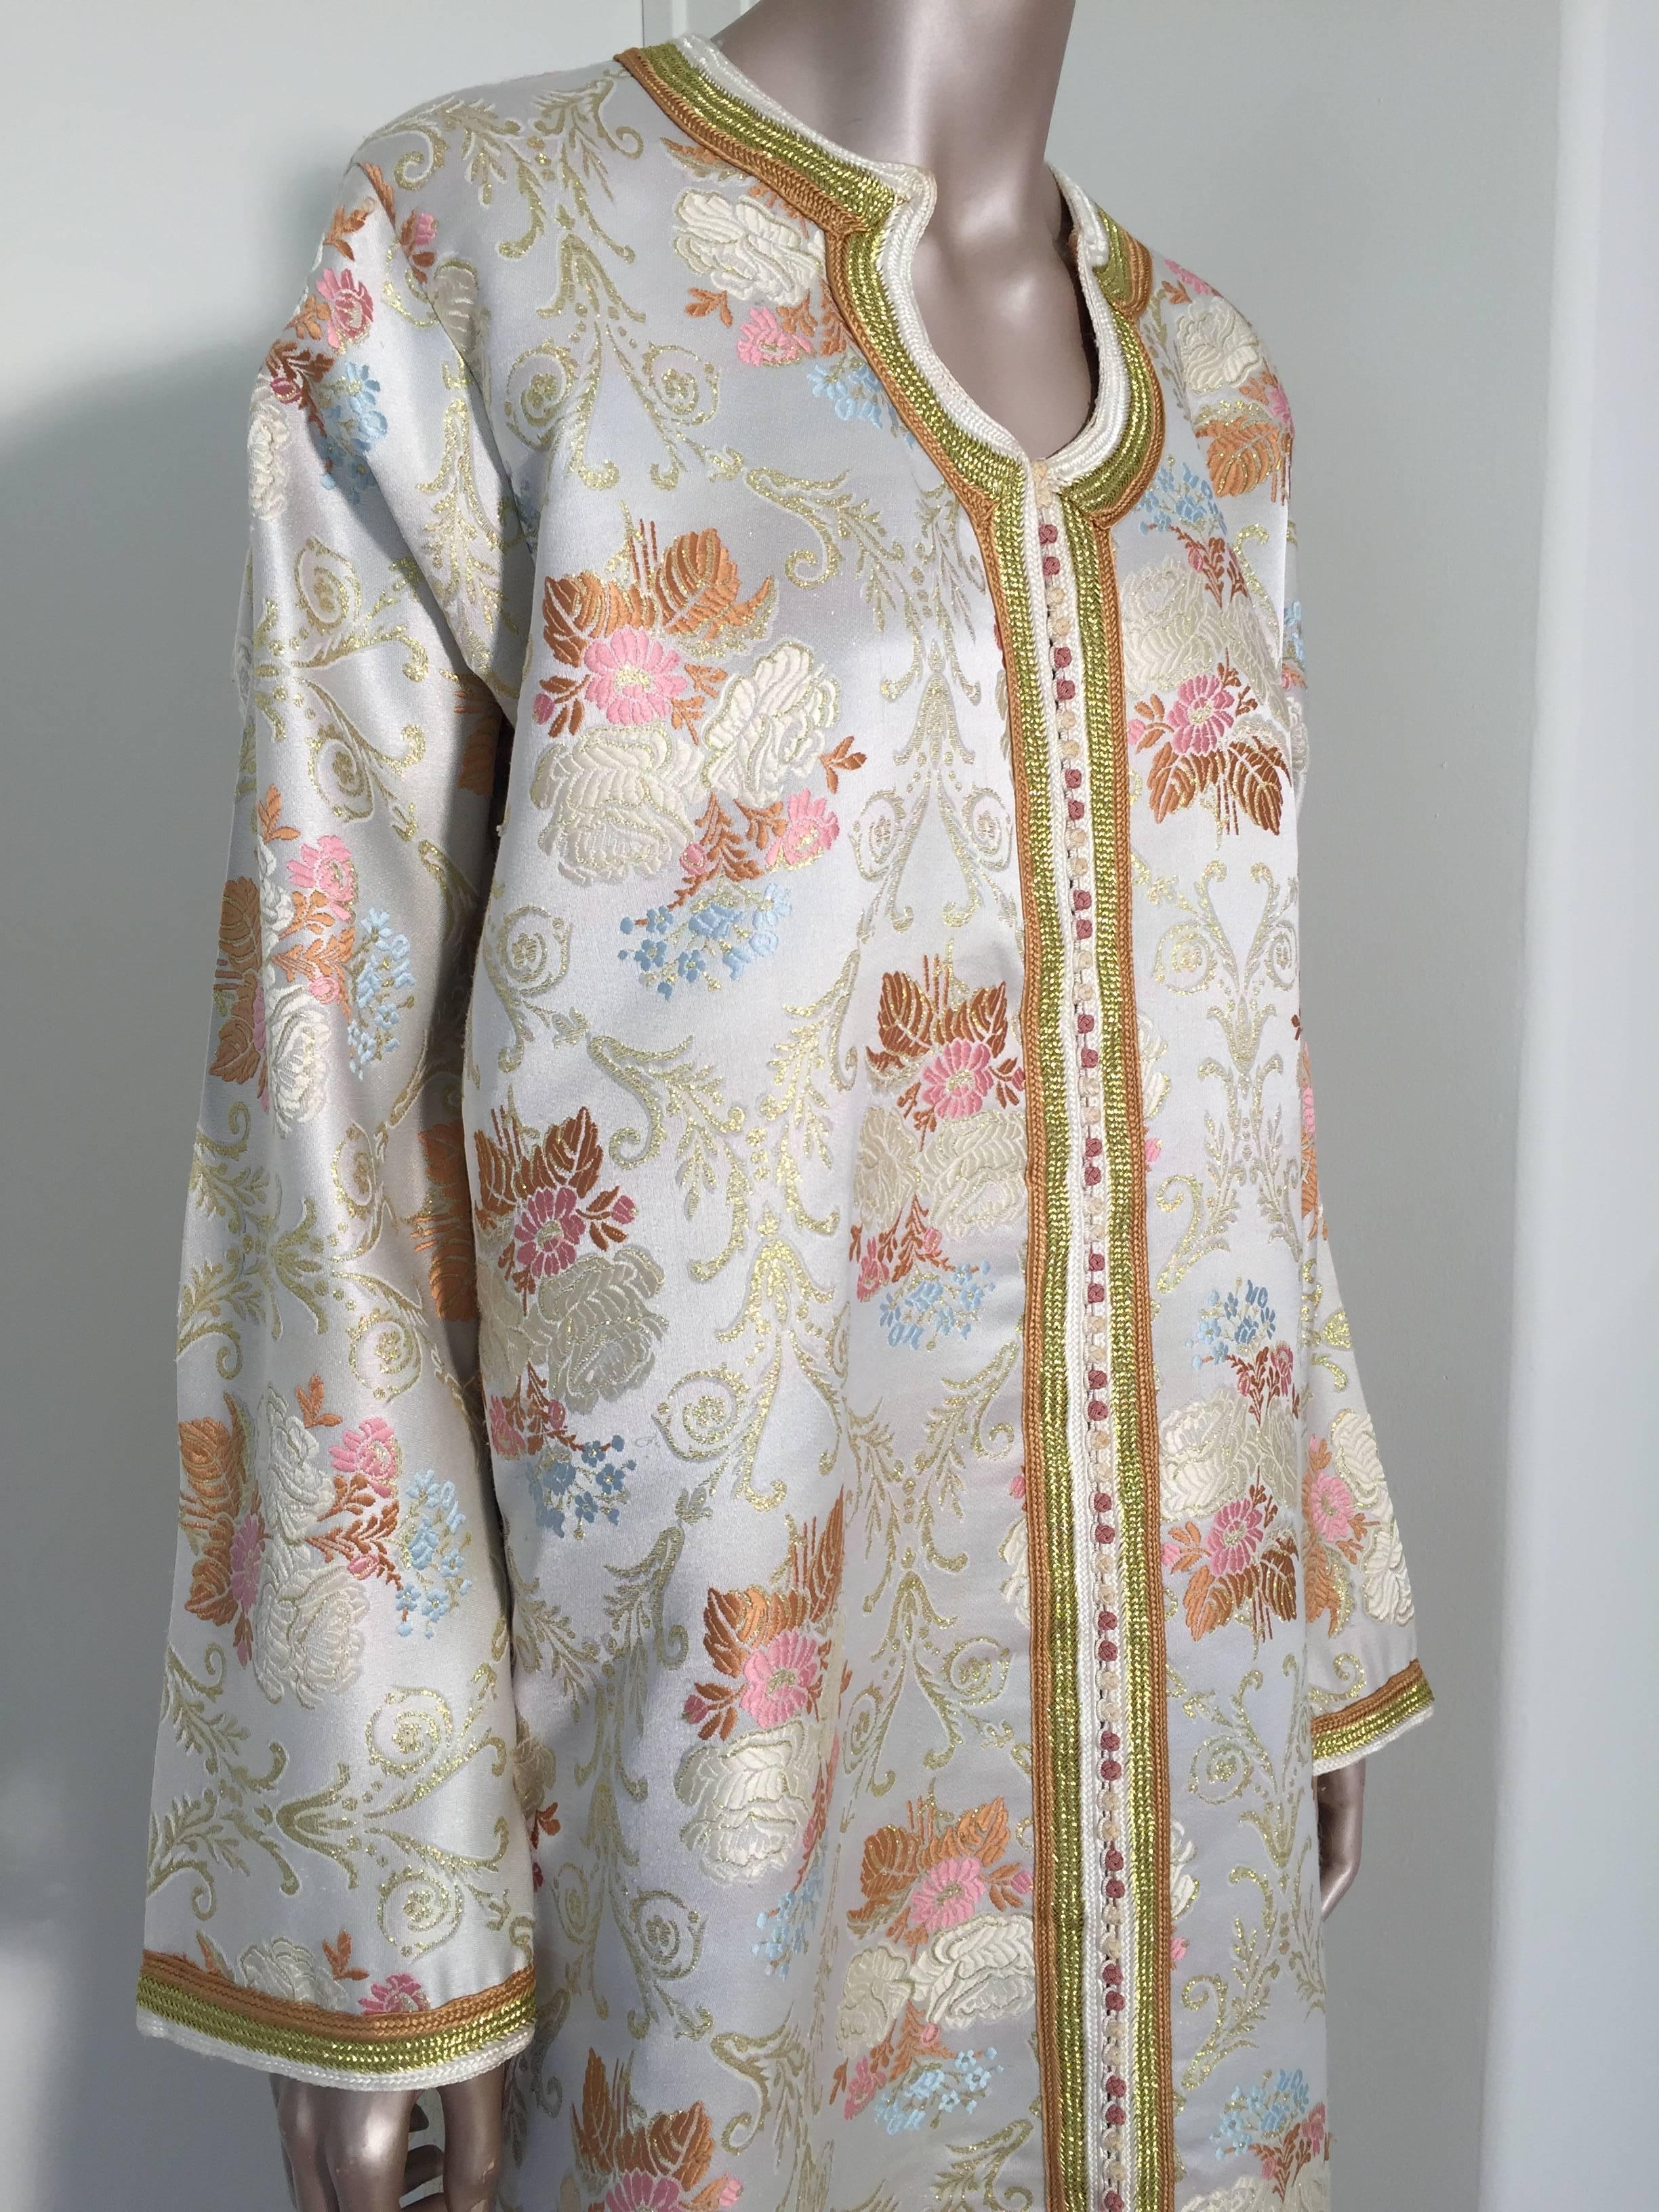 Moroccan Kaftan in Lame Brocade Fabric Size L to XL In Good Condition For Sale In North Hollywood, CA